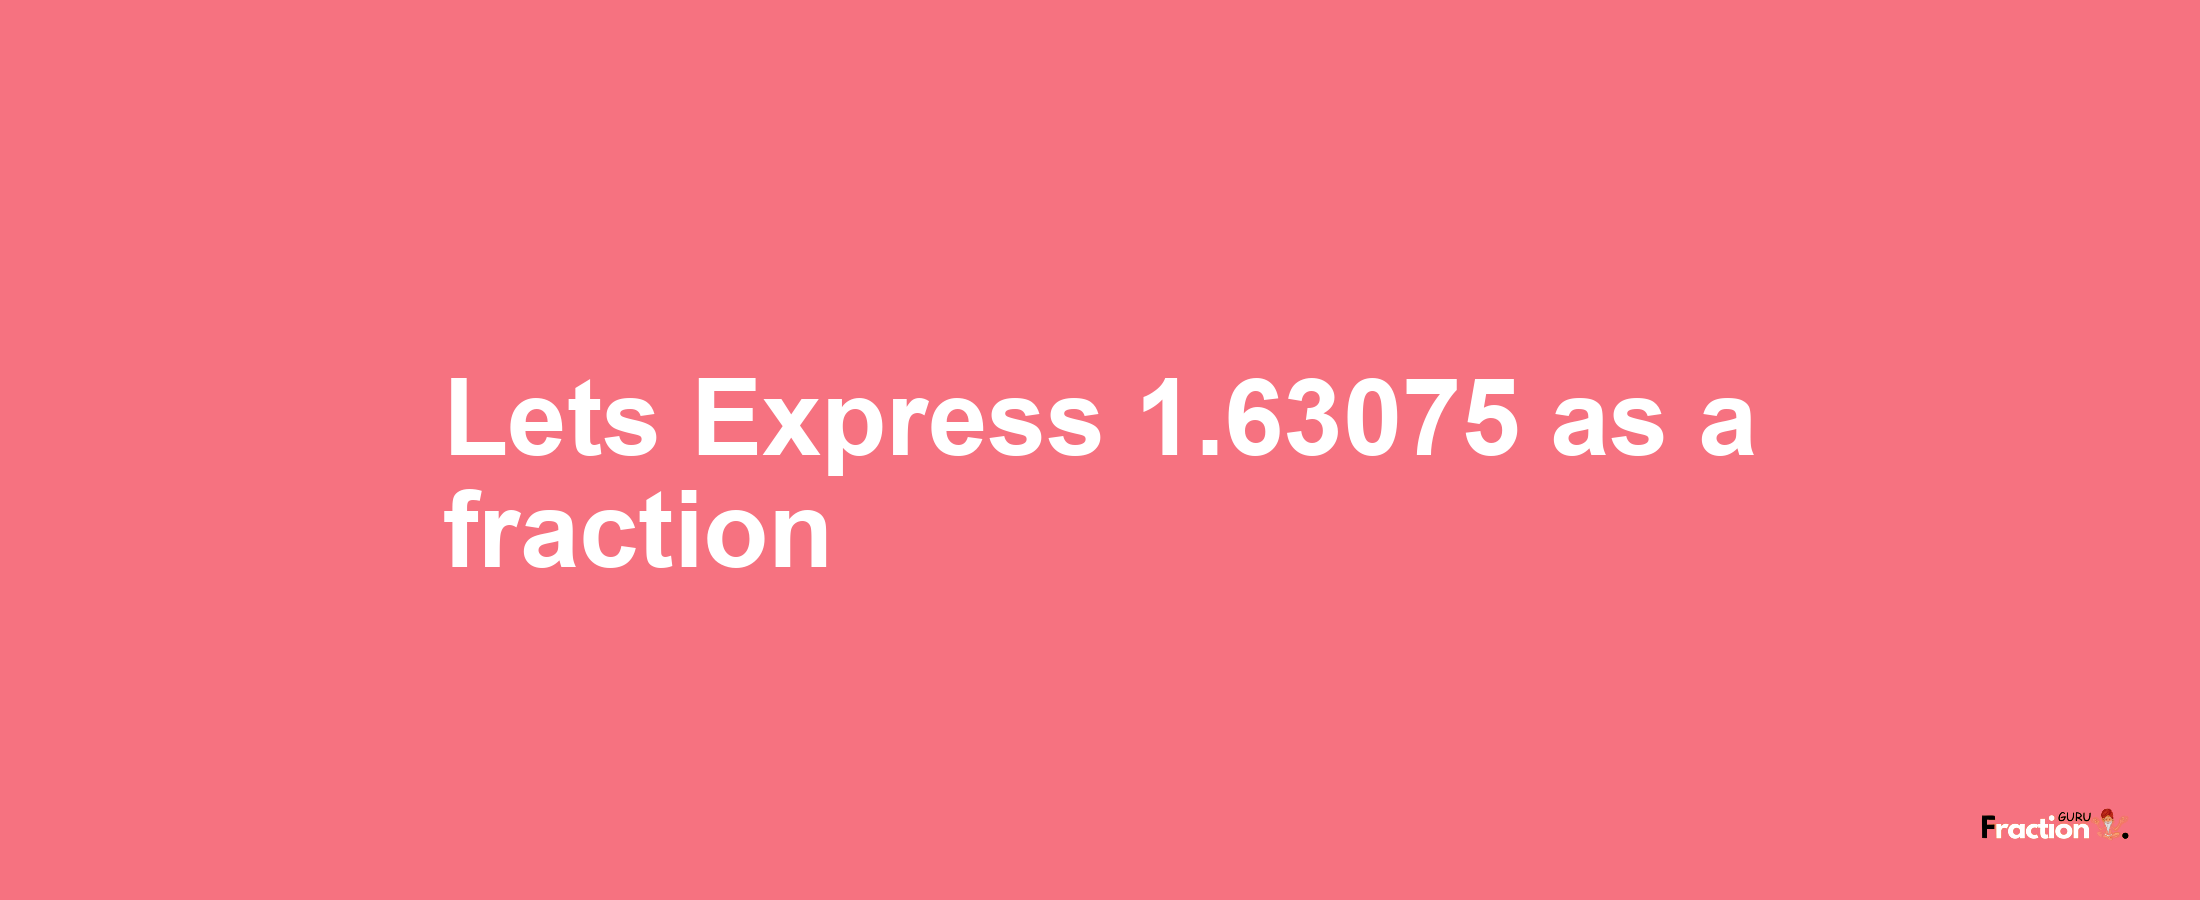 Lets Express 1.63075 as afraction